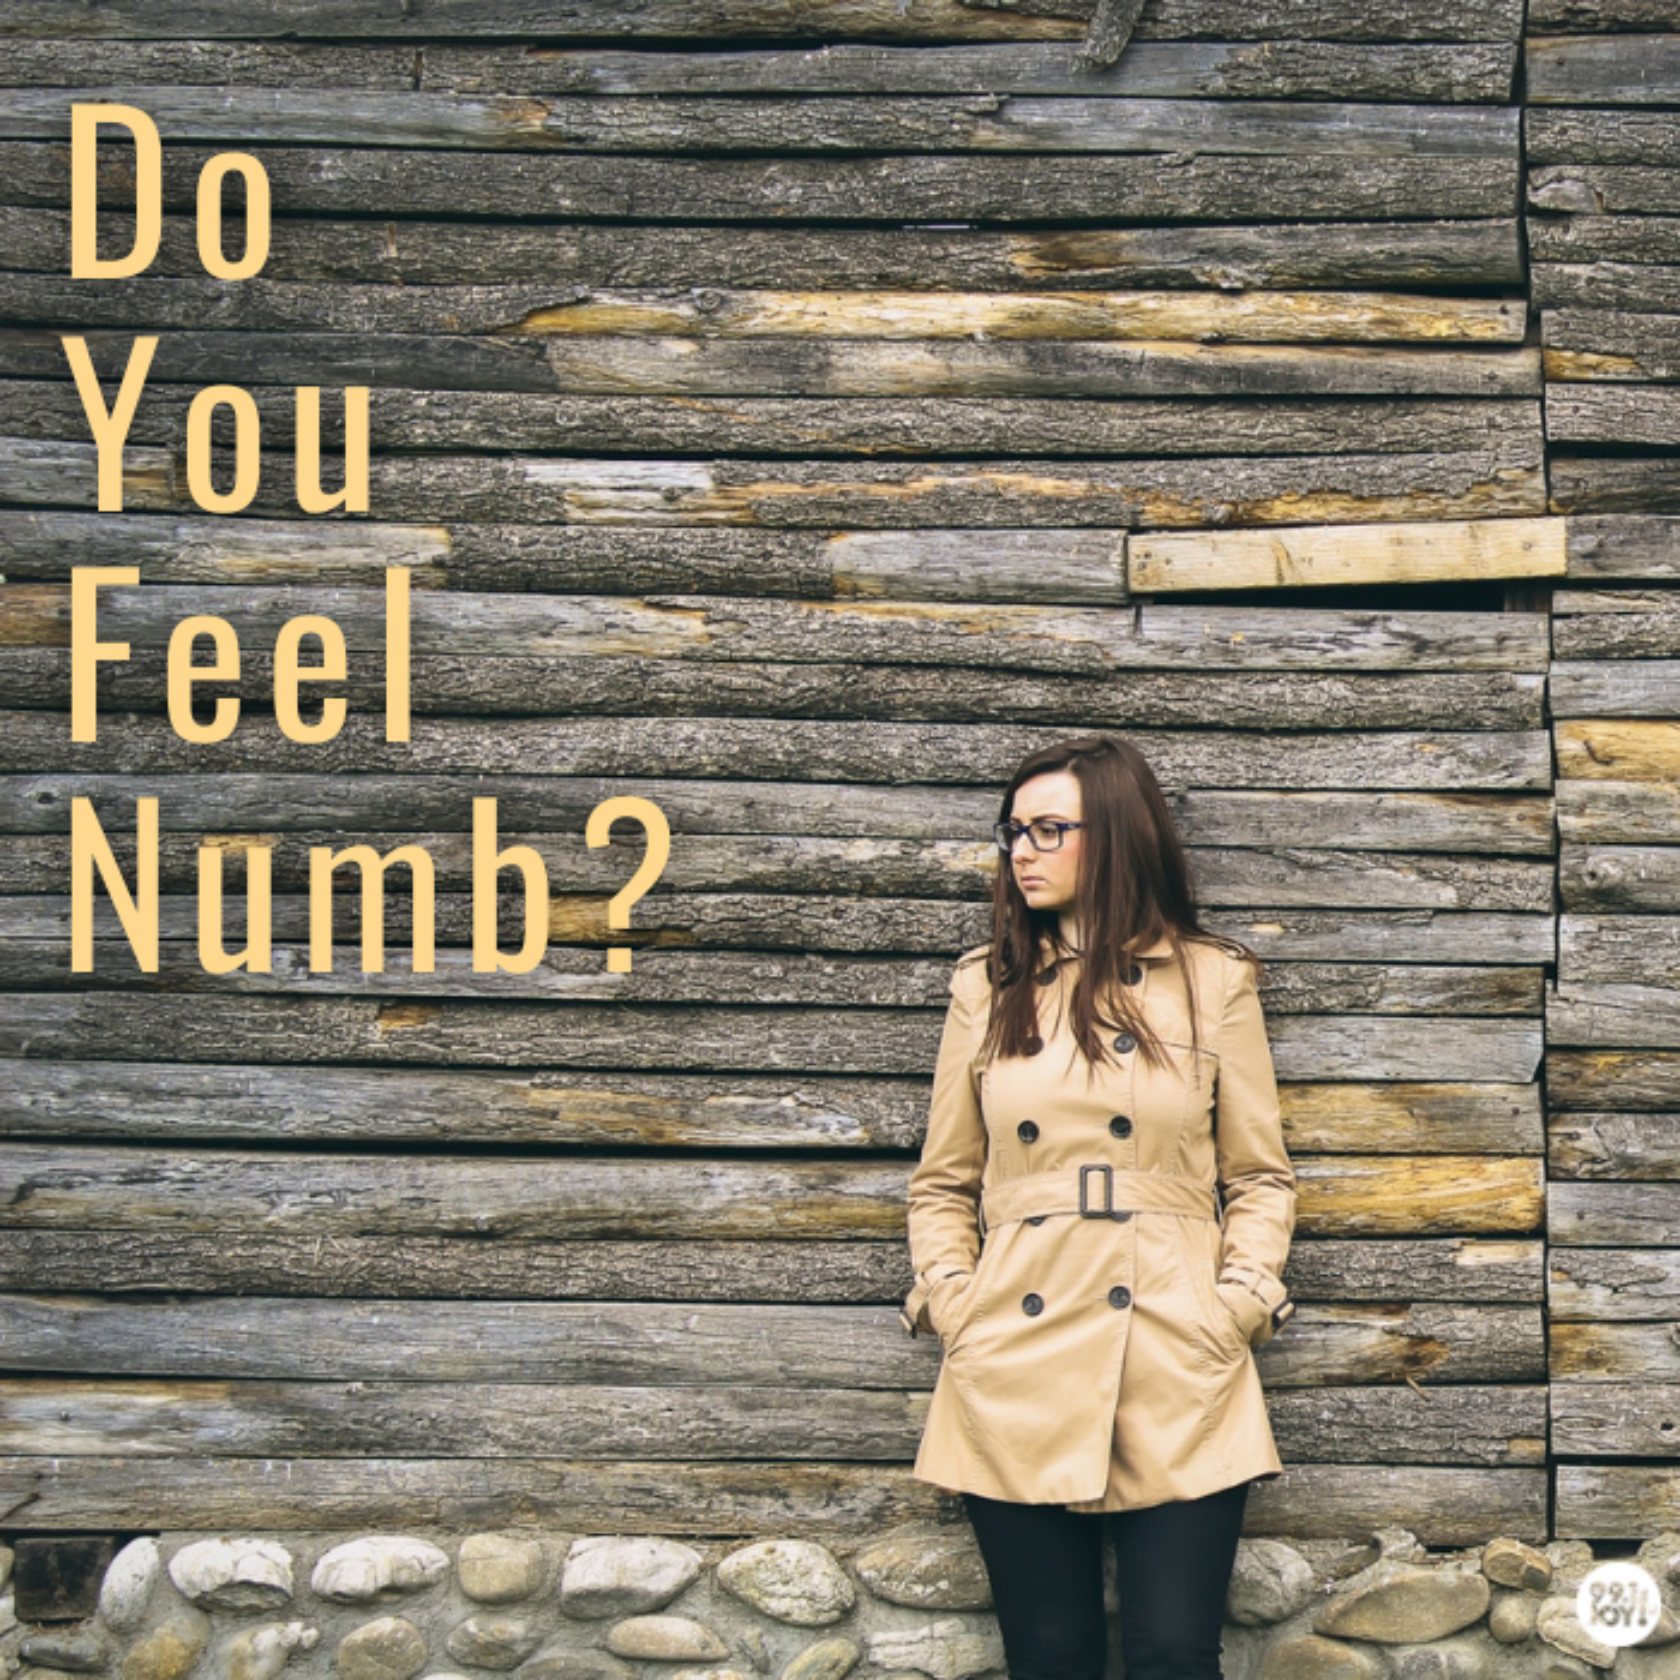 Do You Feel Numb?